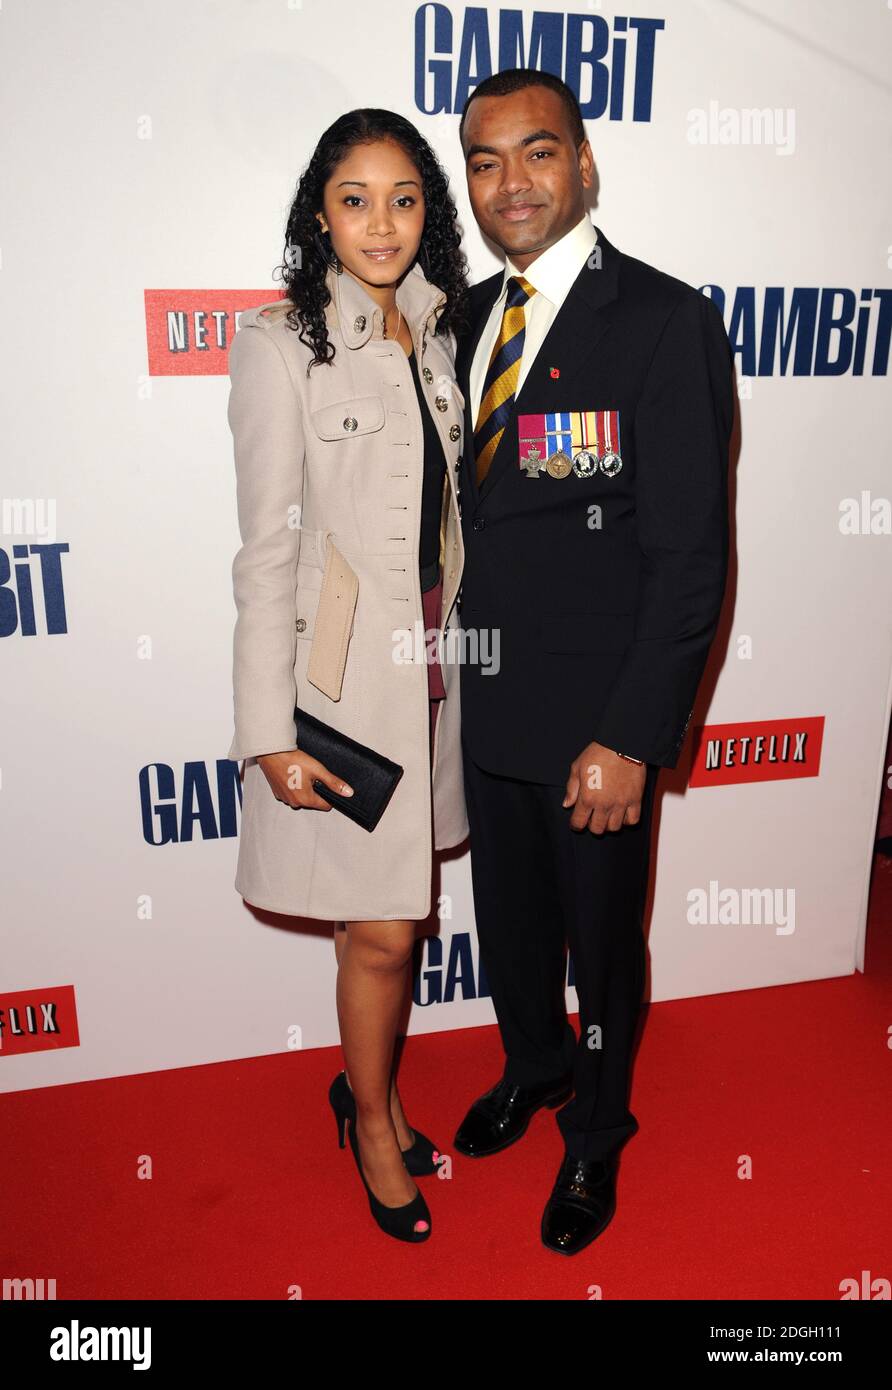 Crp Johnson Beharry arriving on the red carpet at the world premiere of Gambit, sponsored by Netflix. Copyright Doug Peters EMPICS Entertainment  Stock Photo